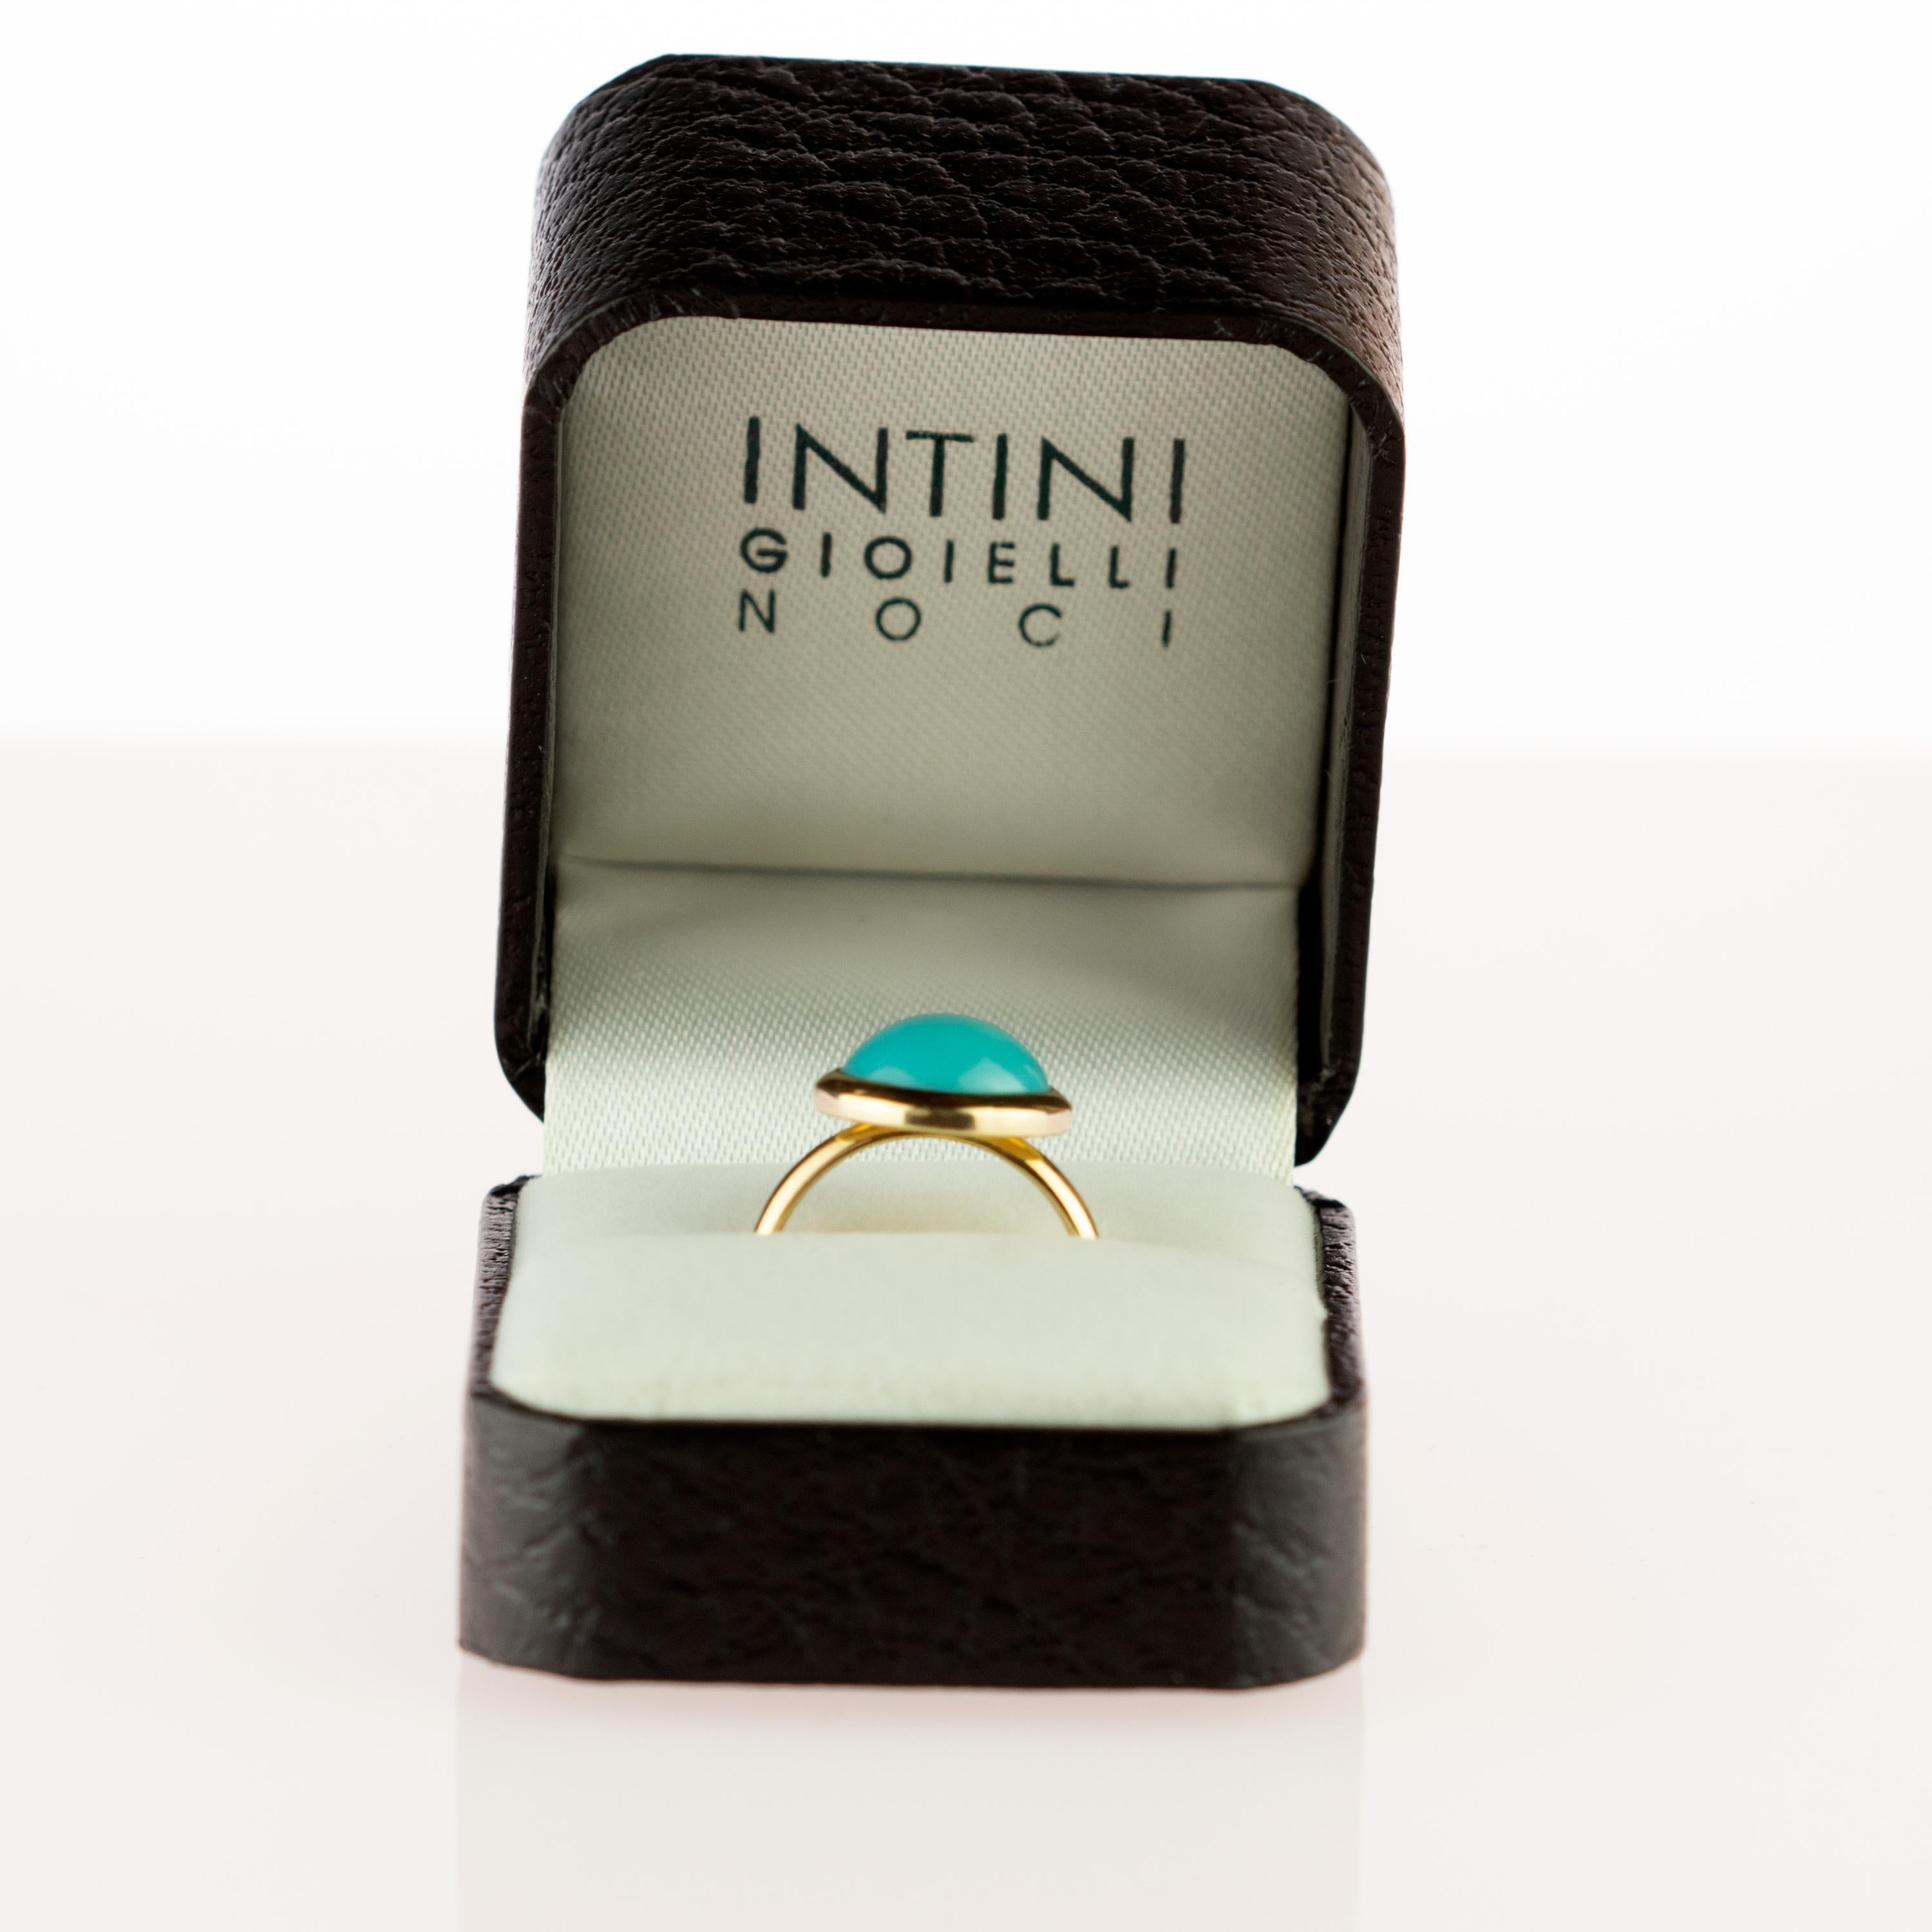 Magnificent ring with an exceptional art work, outstanding display of color and Italian craftsmanship designed by Intini Jewels. This unique ring has a natural round turquoise over a 18 karat yellow gold cocktail design.
 
This ring represents the